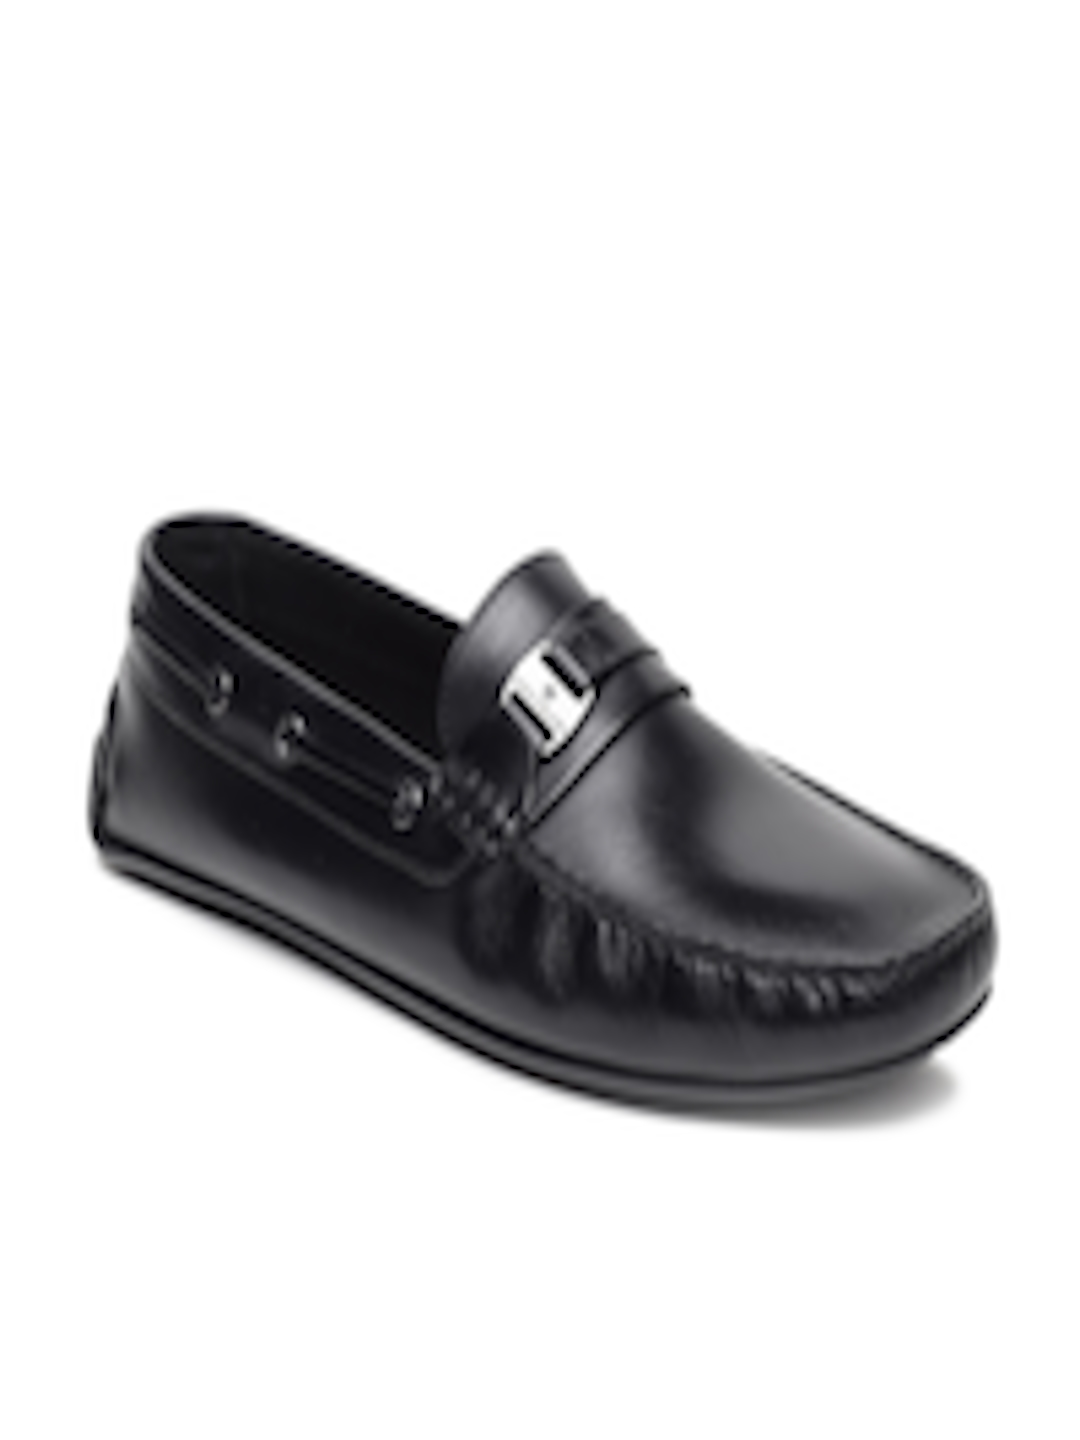 Buy Louis Philippe Men Black Leather Formal Loafers - Formal Shoes for Men 7704885 | Myntra